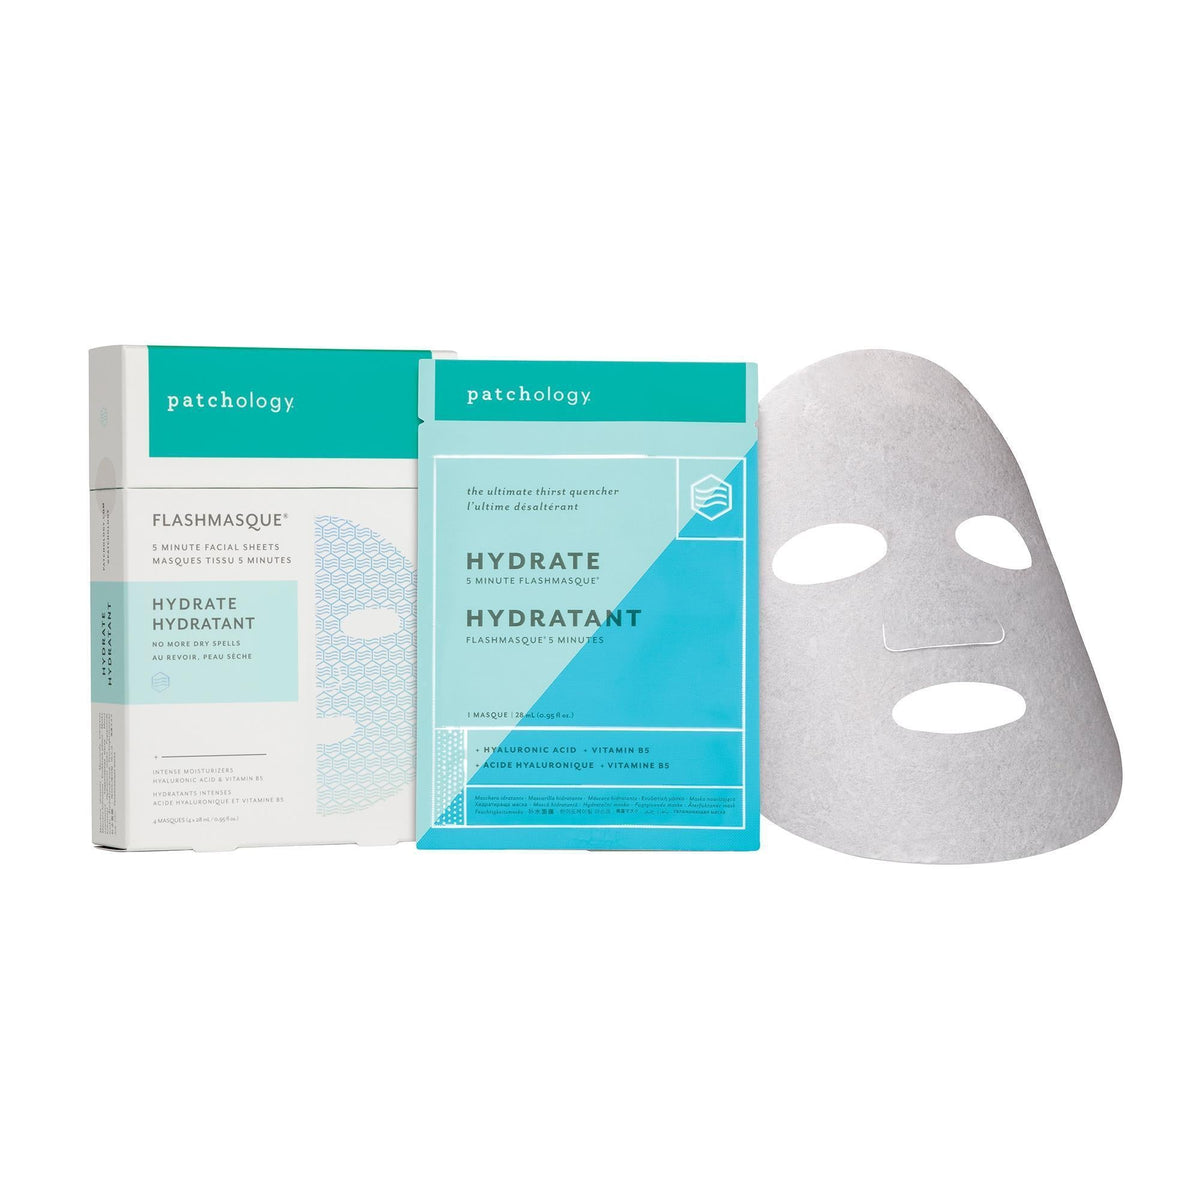 Exfoliants, Peels, Masks & Scr Patchology Hydrate FlashMasque /4 Pack